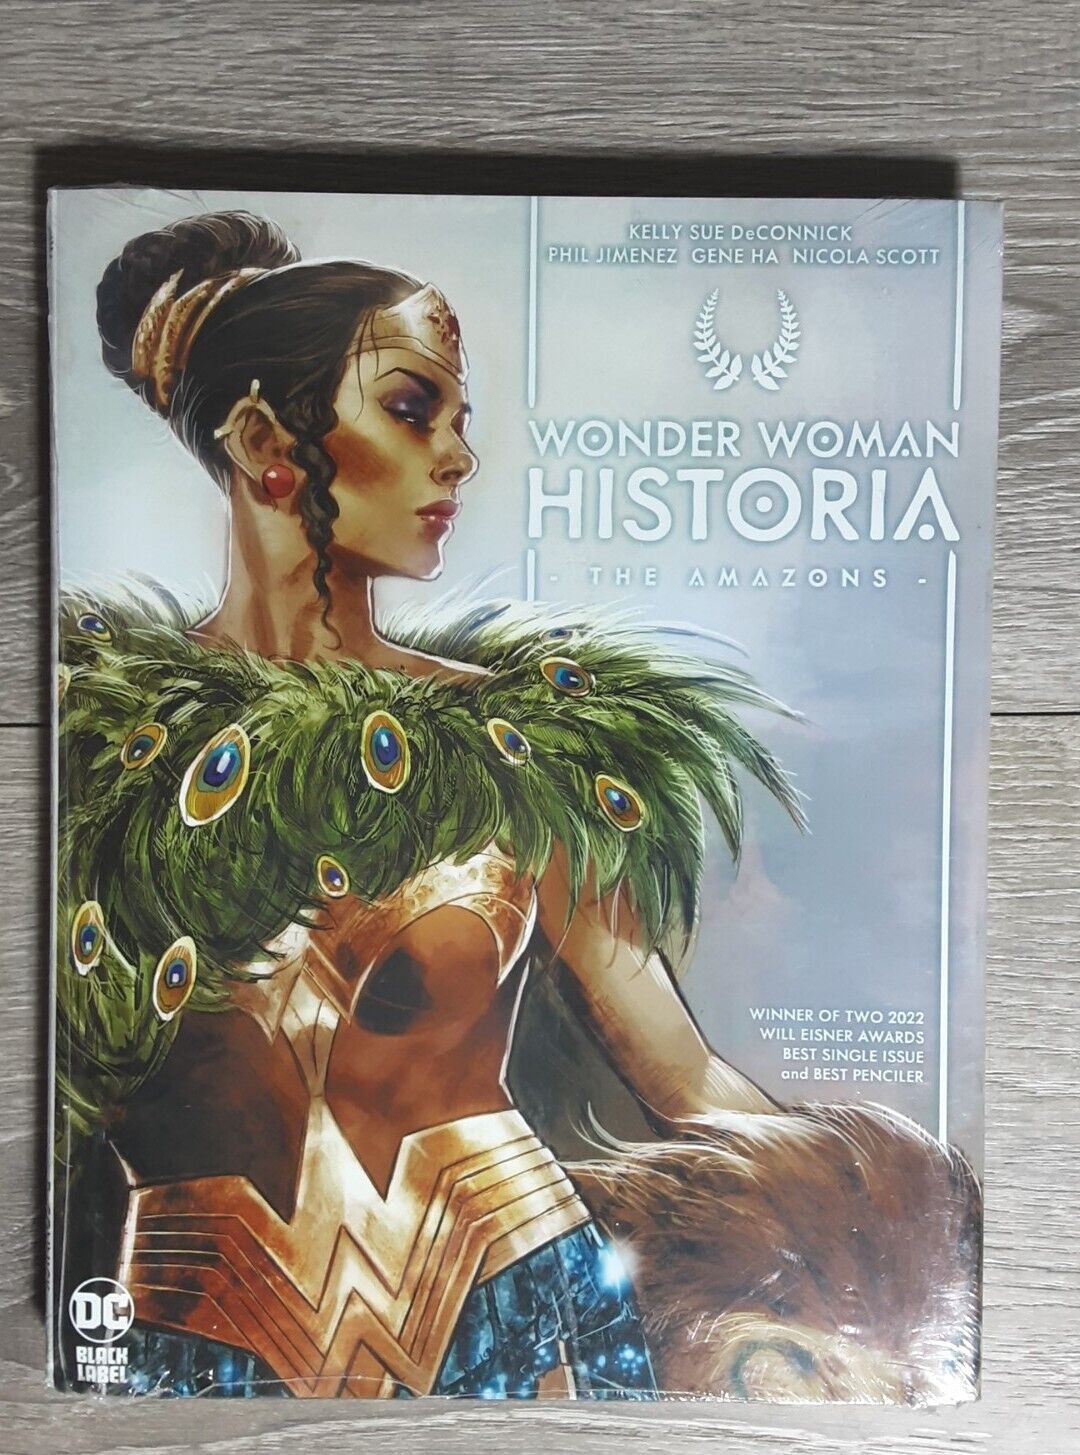 Wonder Woman Historia: The Amazons''''Still in shrink-wrap NEW